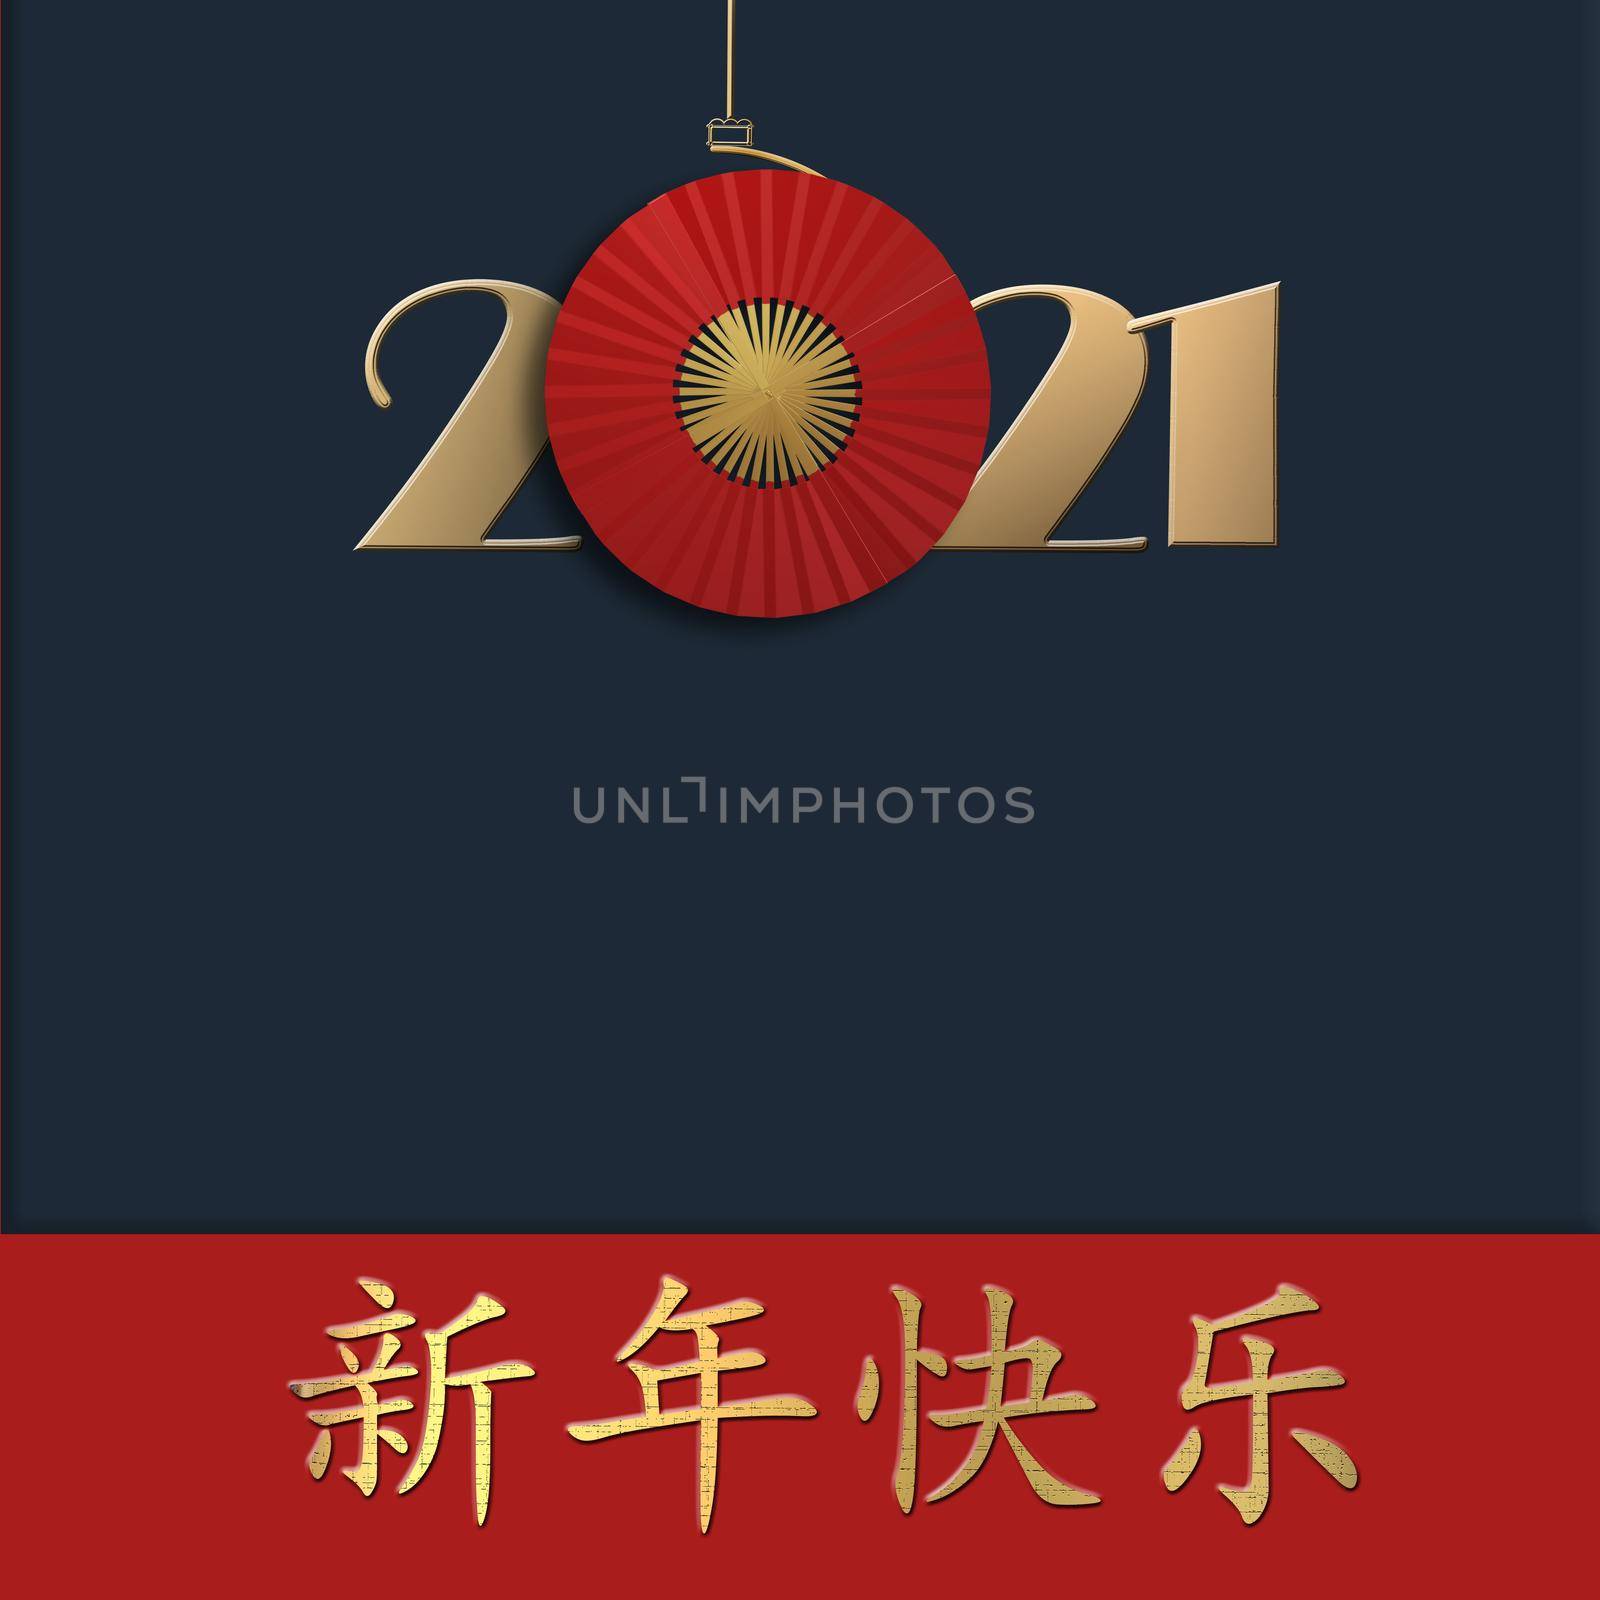 Chinese 2021 new year over blue. Hanging digit 2021 with red fan, Gold text Happy New Year. 3d illustration